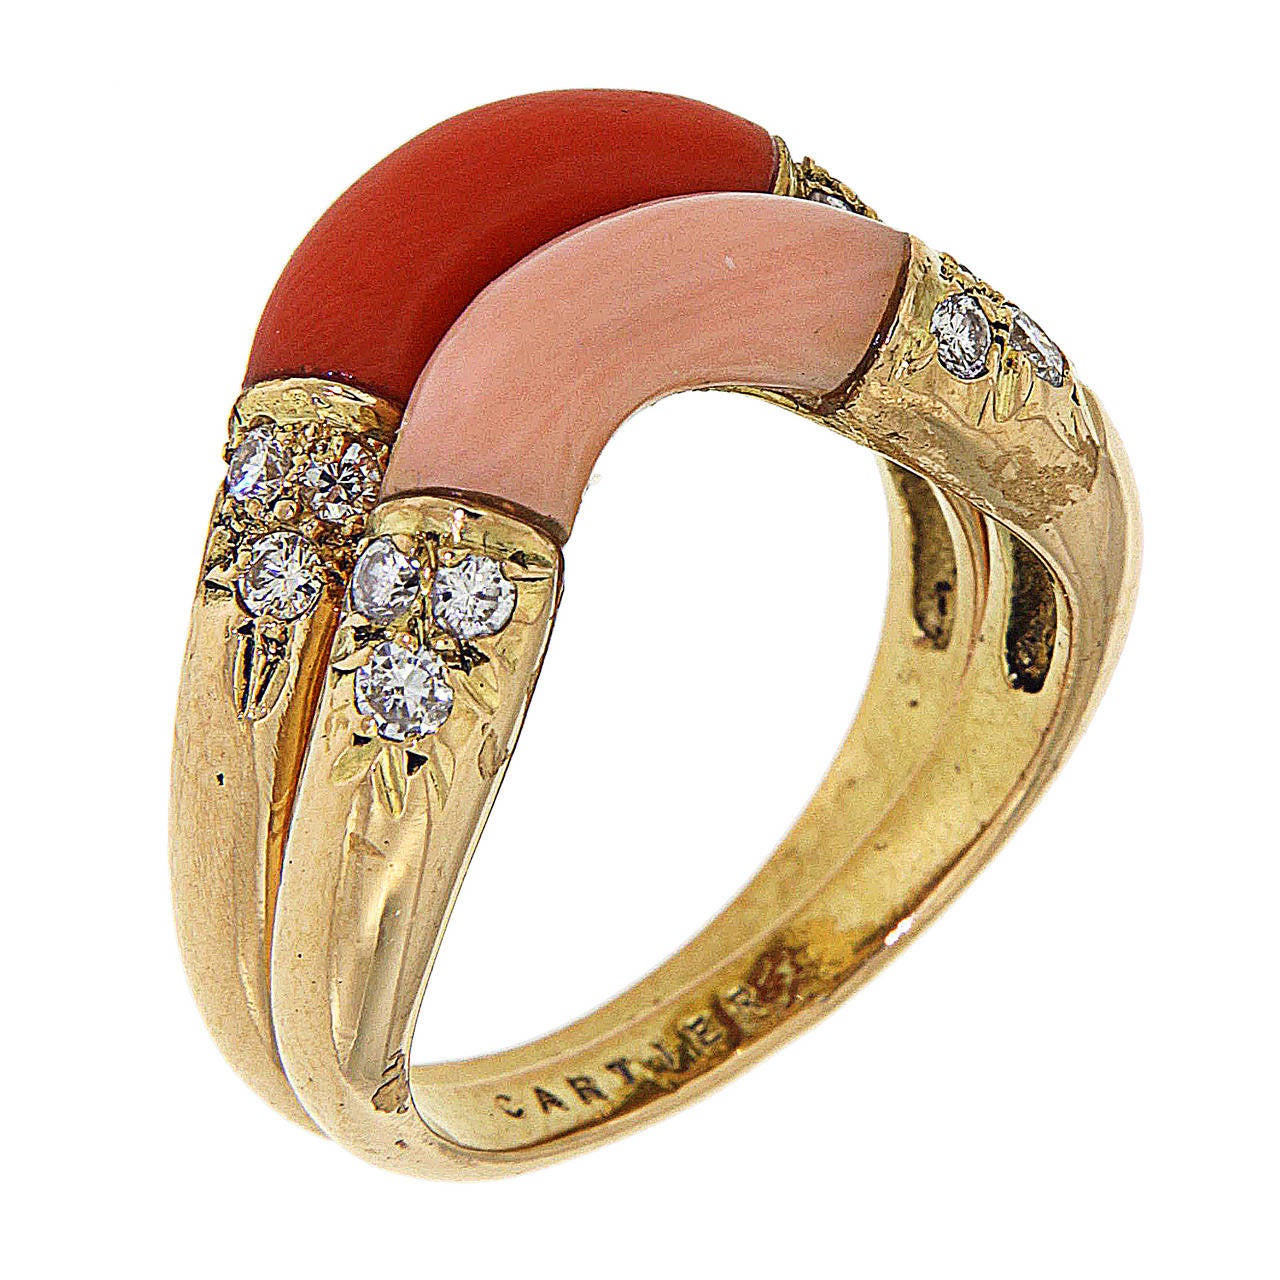 1960s Cartier Diamonds Coral Gold Rings